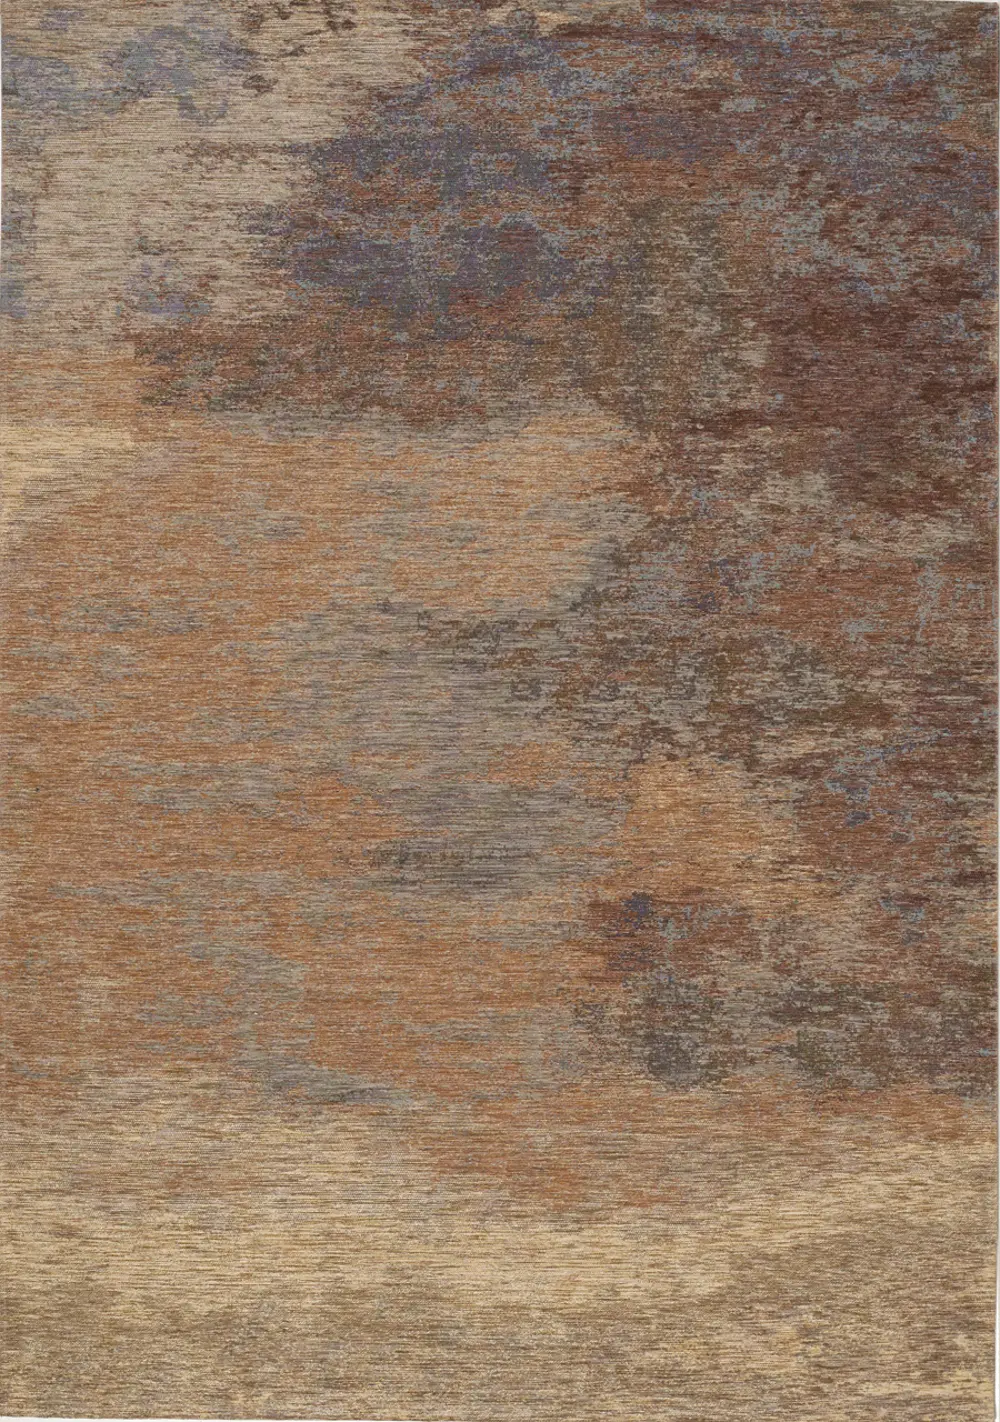 8 x 11 Large Distressed Beige and Red Area Rug - Cathedral-1